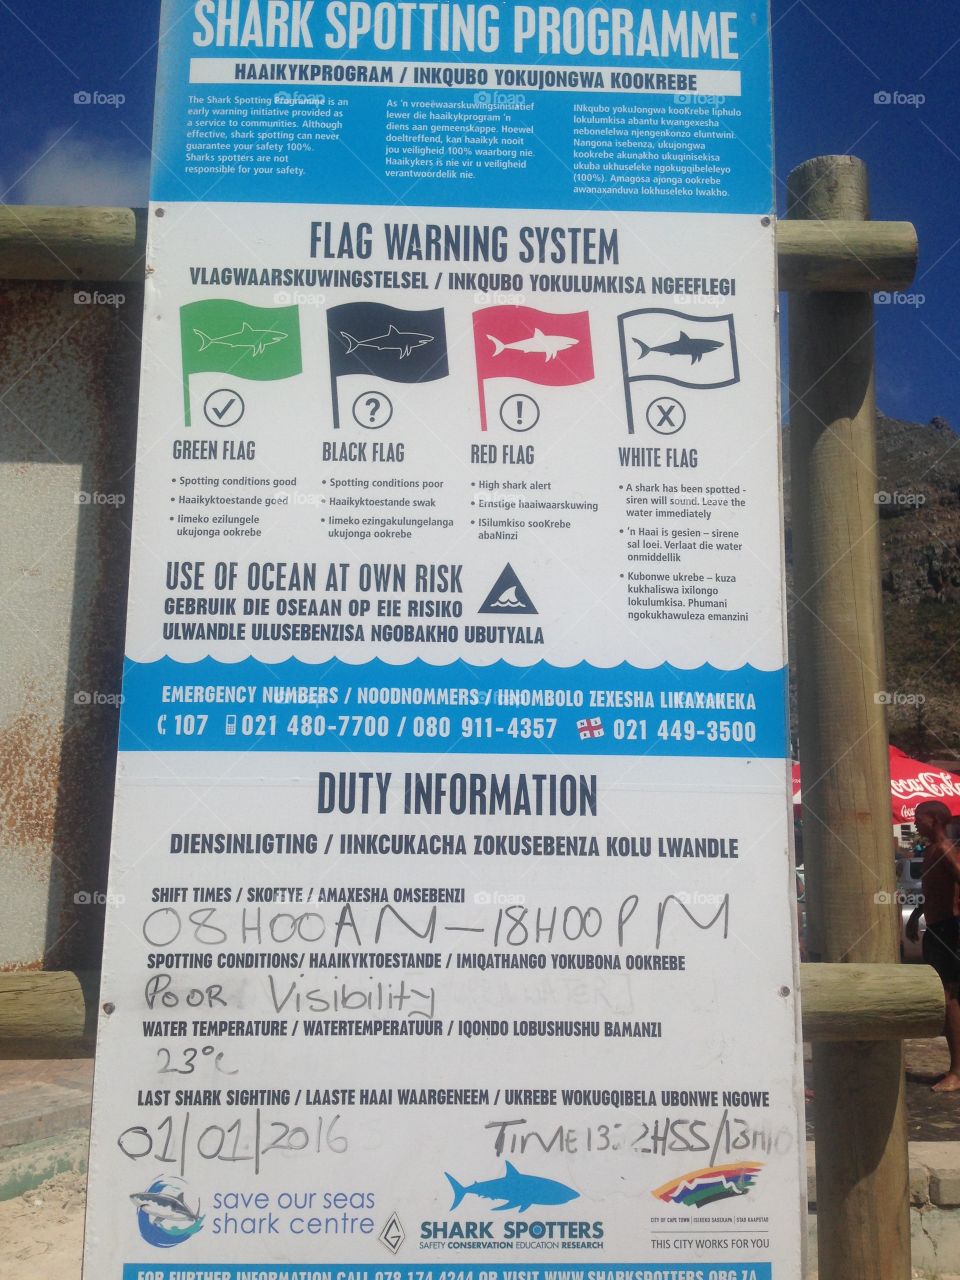 Shark spotting warning system info in South Africa